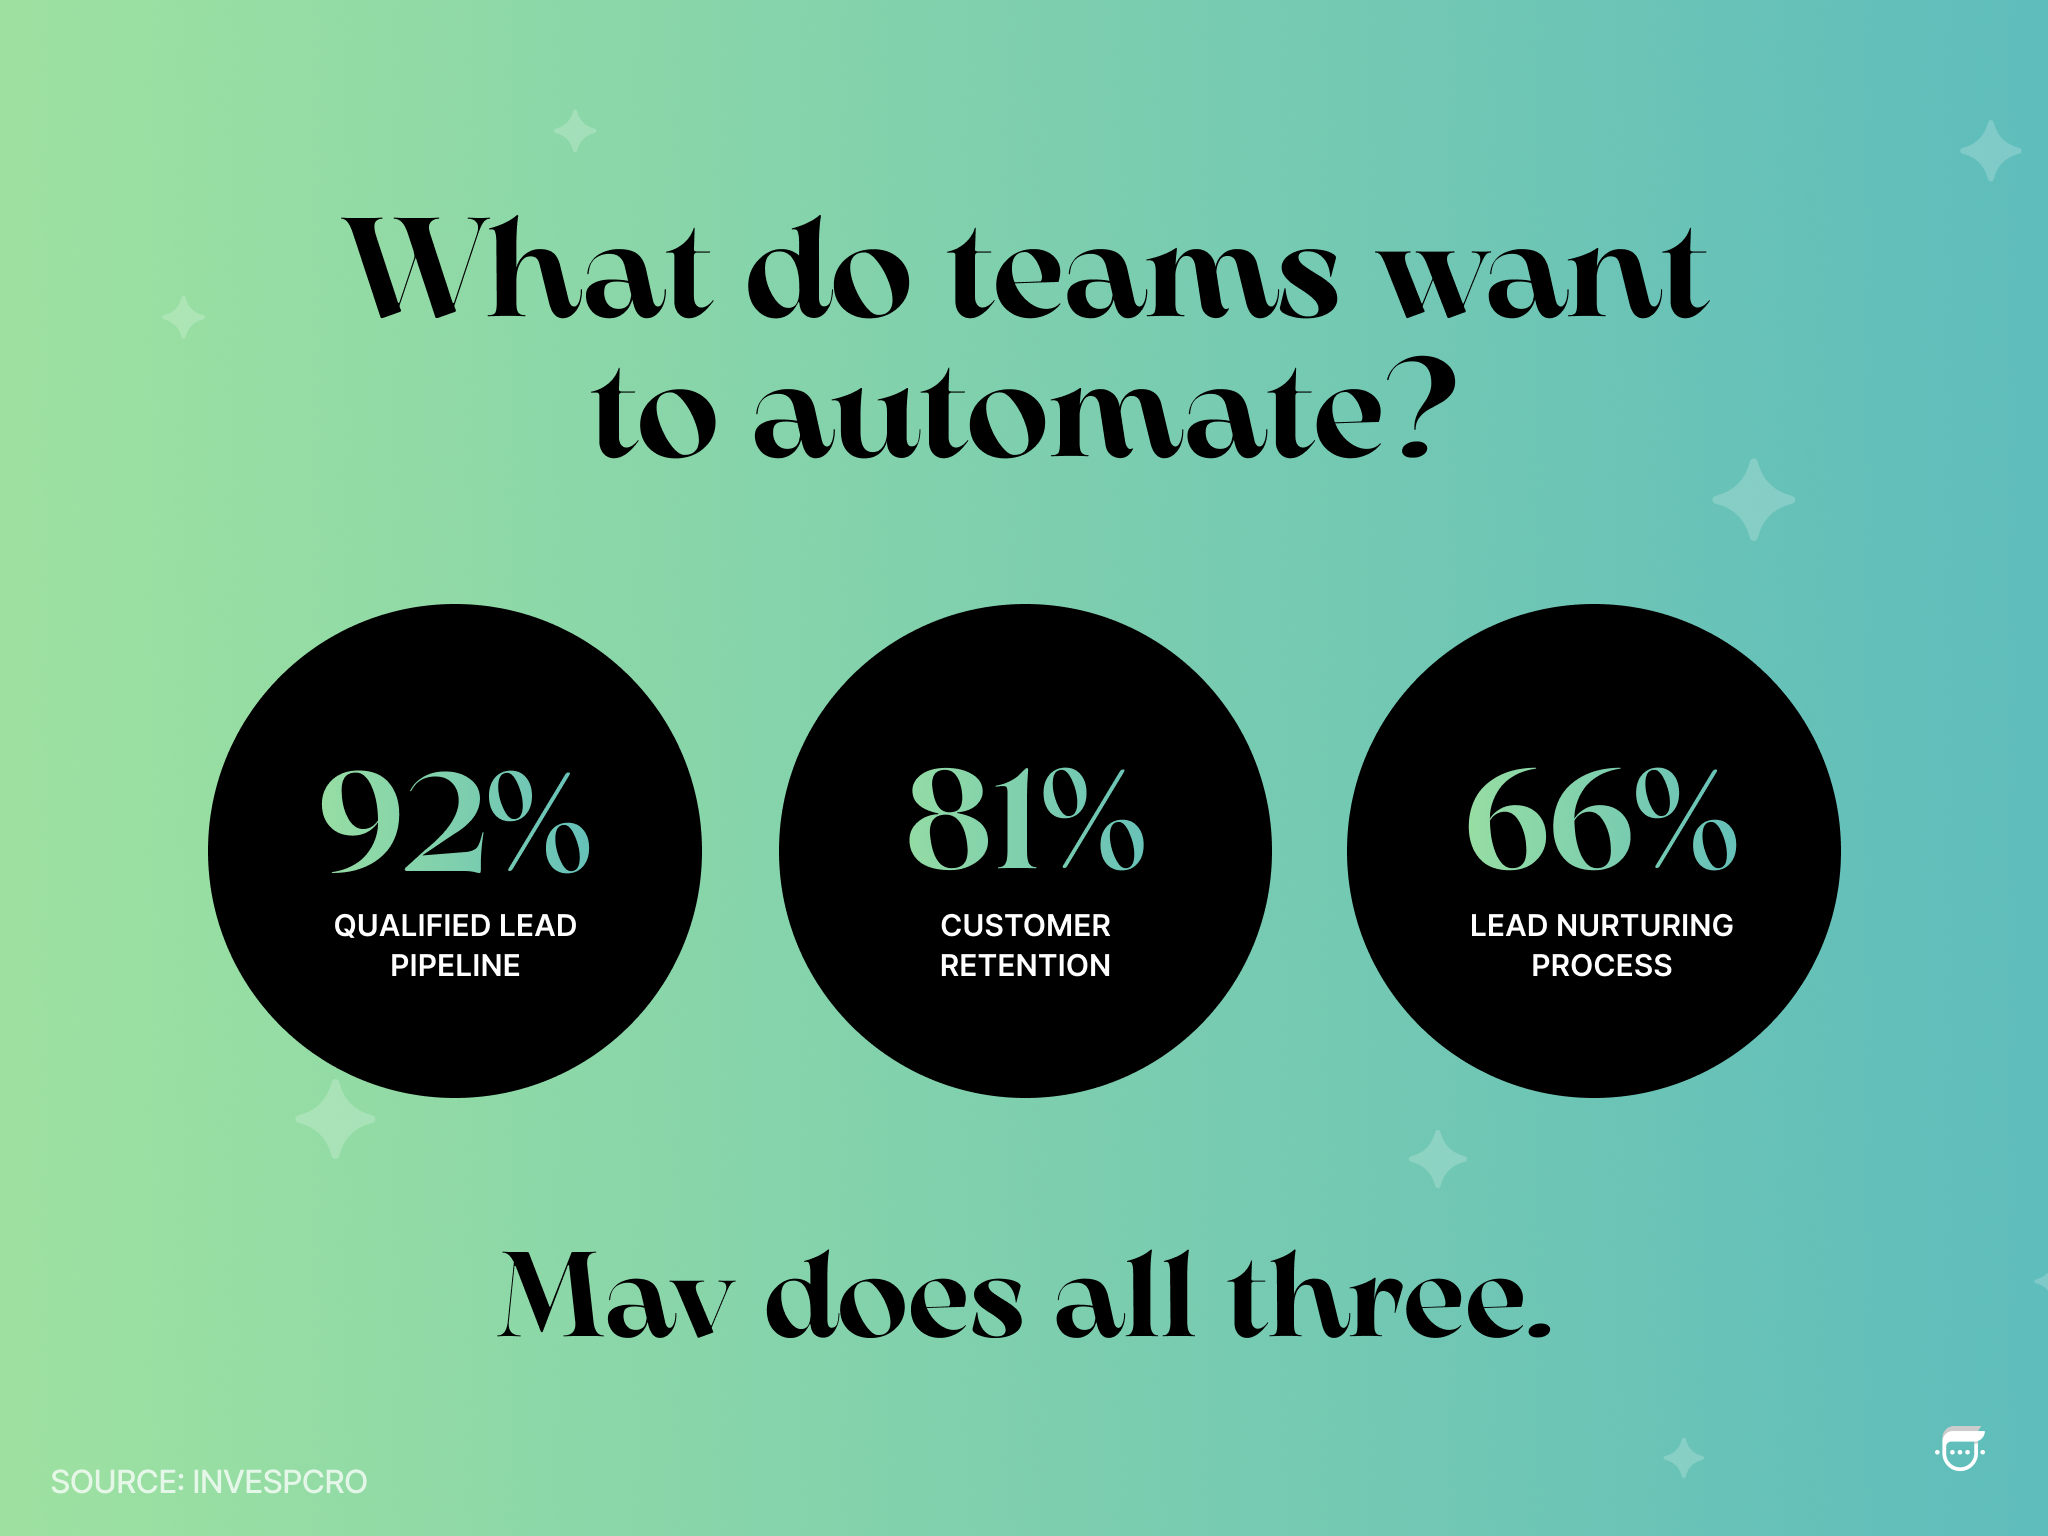 What do Teams Want to Automate?